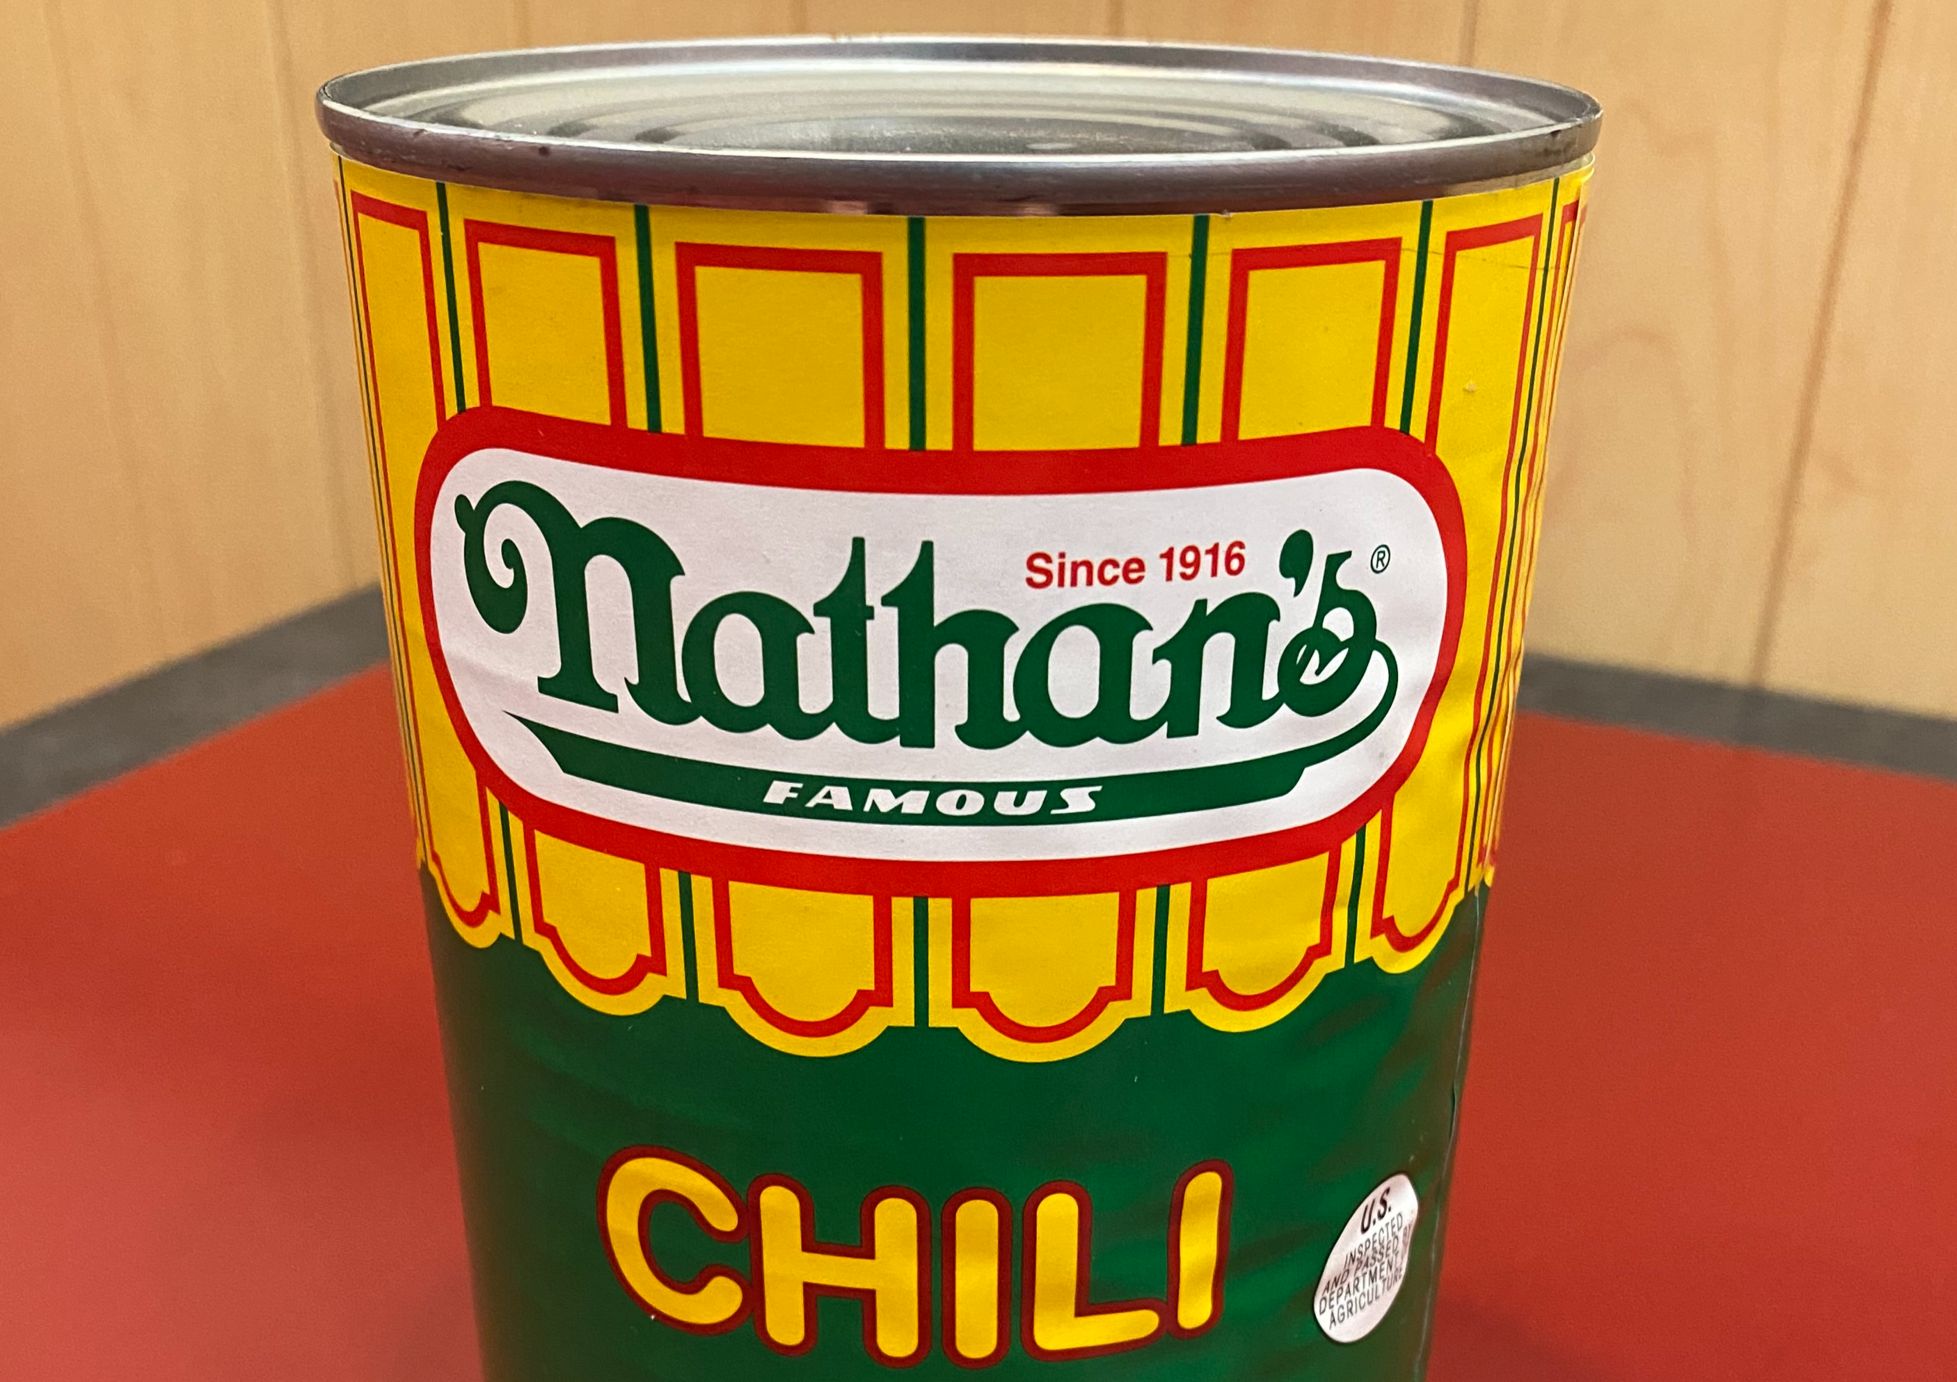 New T-Shirts, Coney Island Chili Topping and Original Deli Style Mustard Now Available at the Nathan's Famous Online Shop